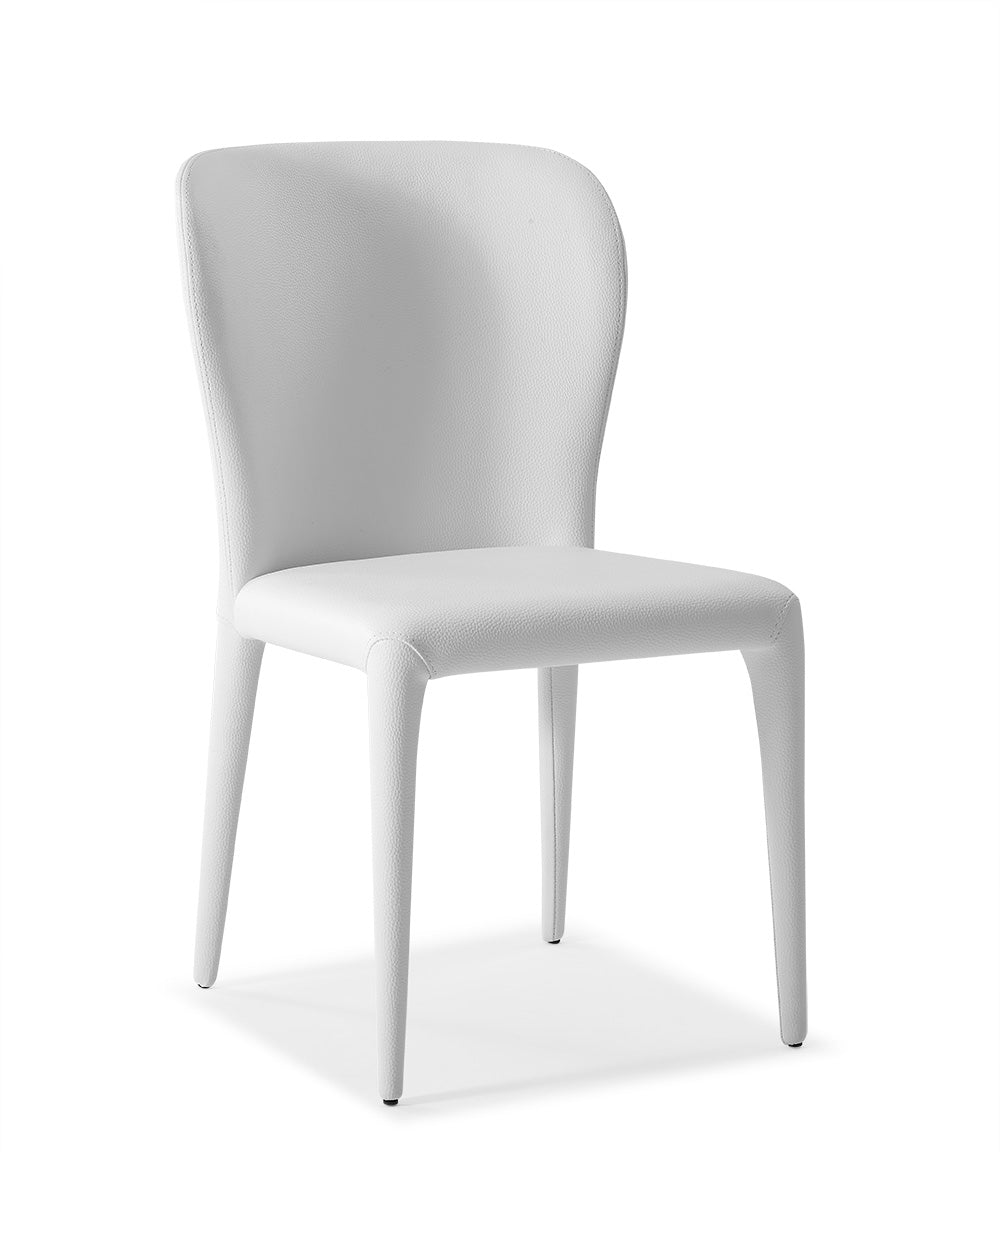 Set of Two White Upholstered Faux Leather Dining Side Chairs